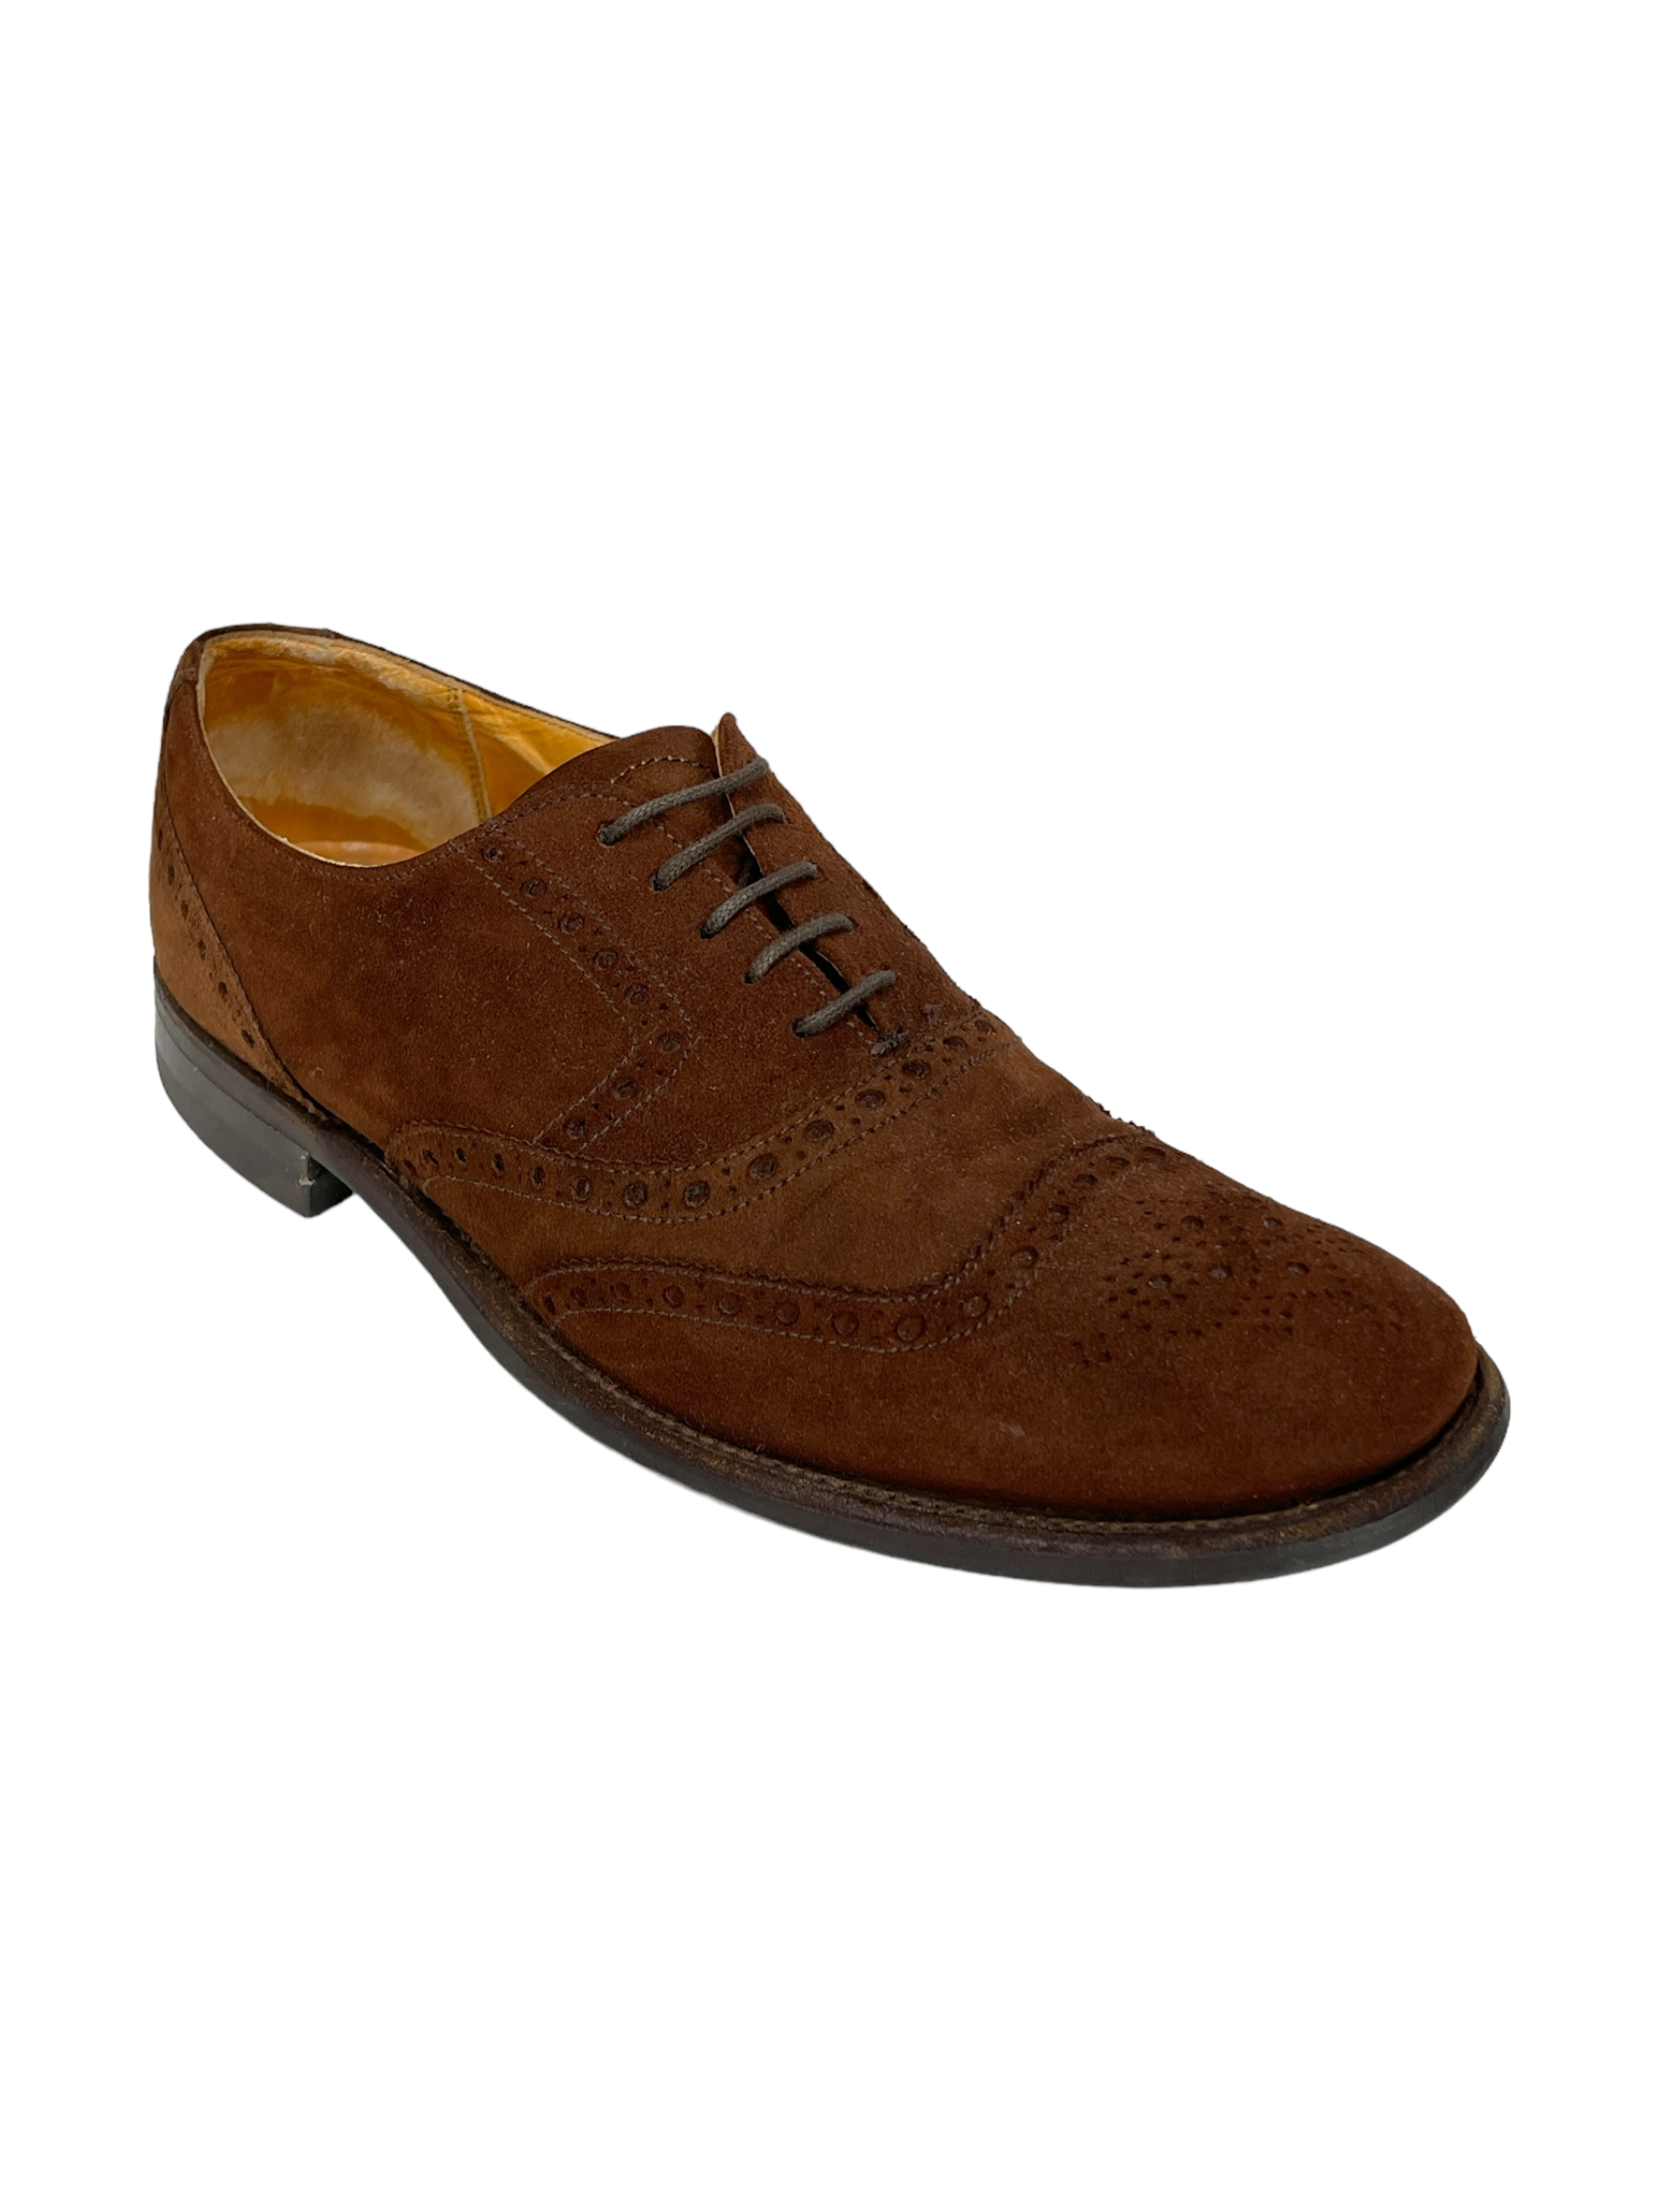 Cole Haan Brown Suede Dress Shoe - Genuine Design Luxury Consignment Calgary, Alberta, Canada New and Pre-Owned Clothing, Shoes, Accessories.